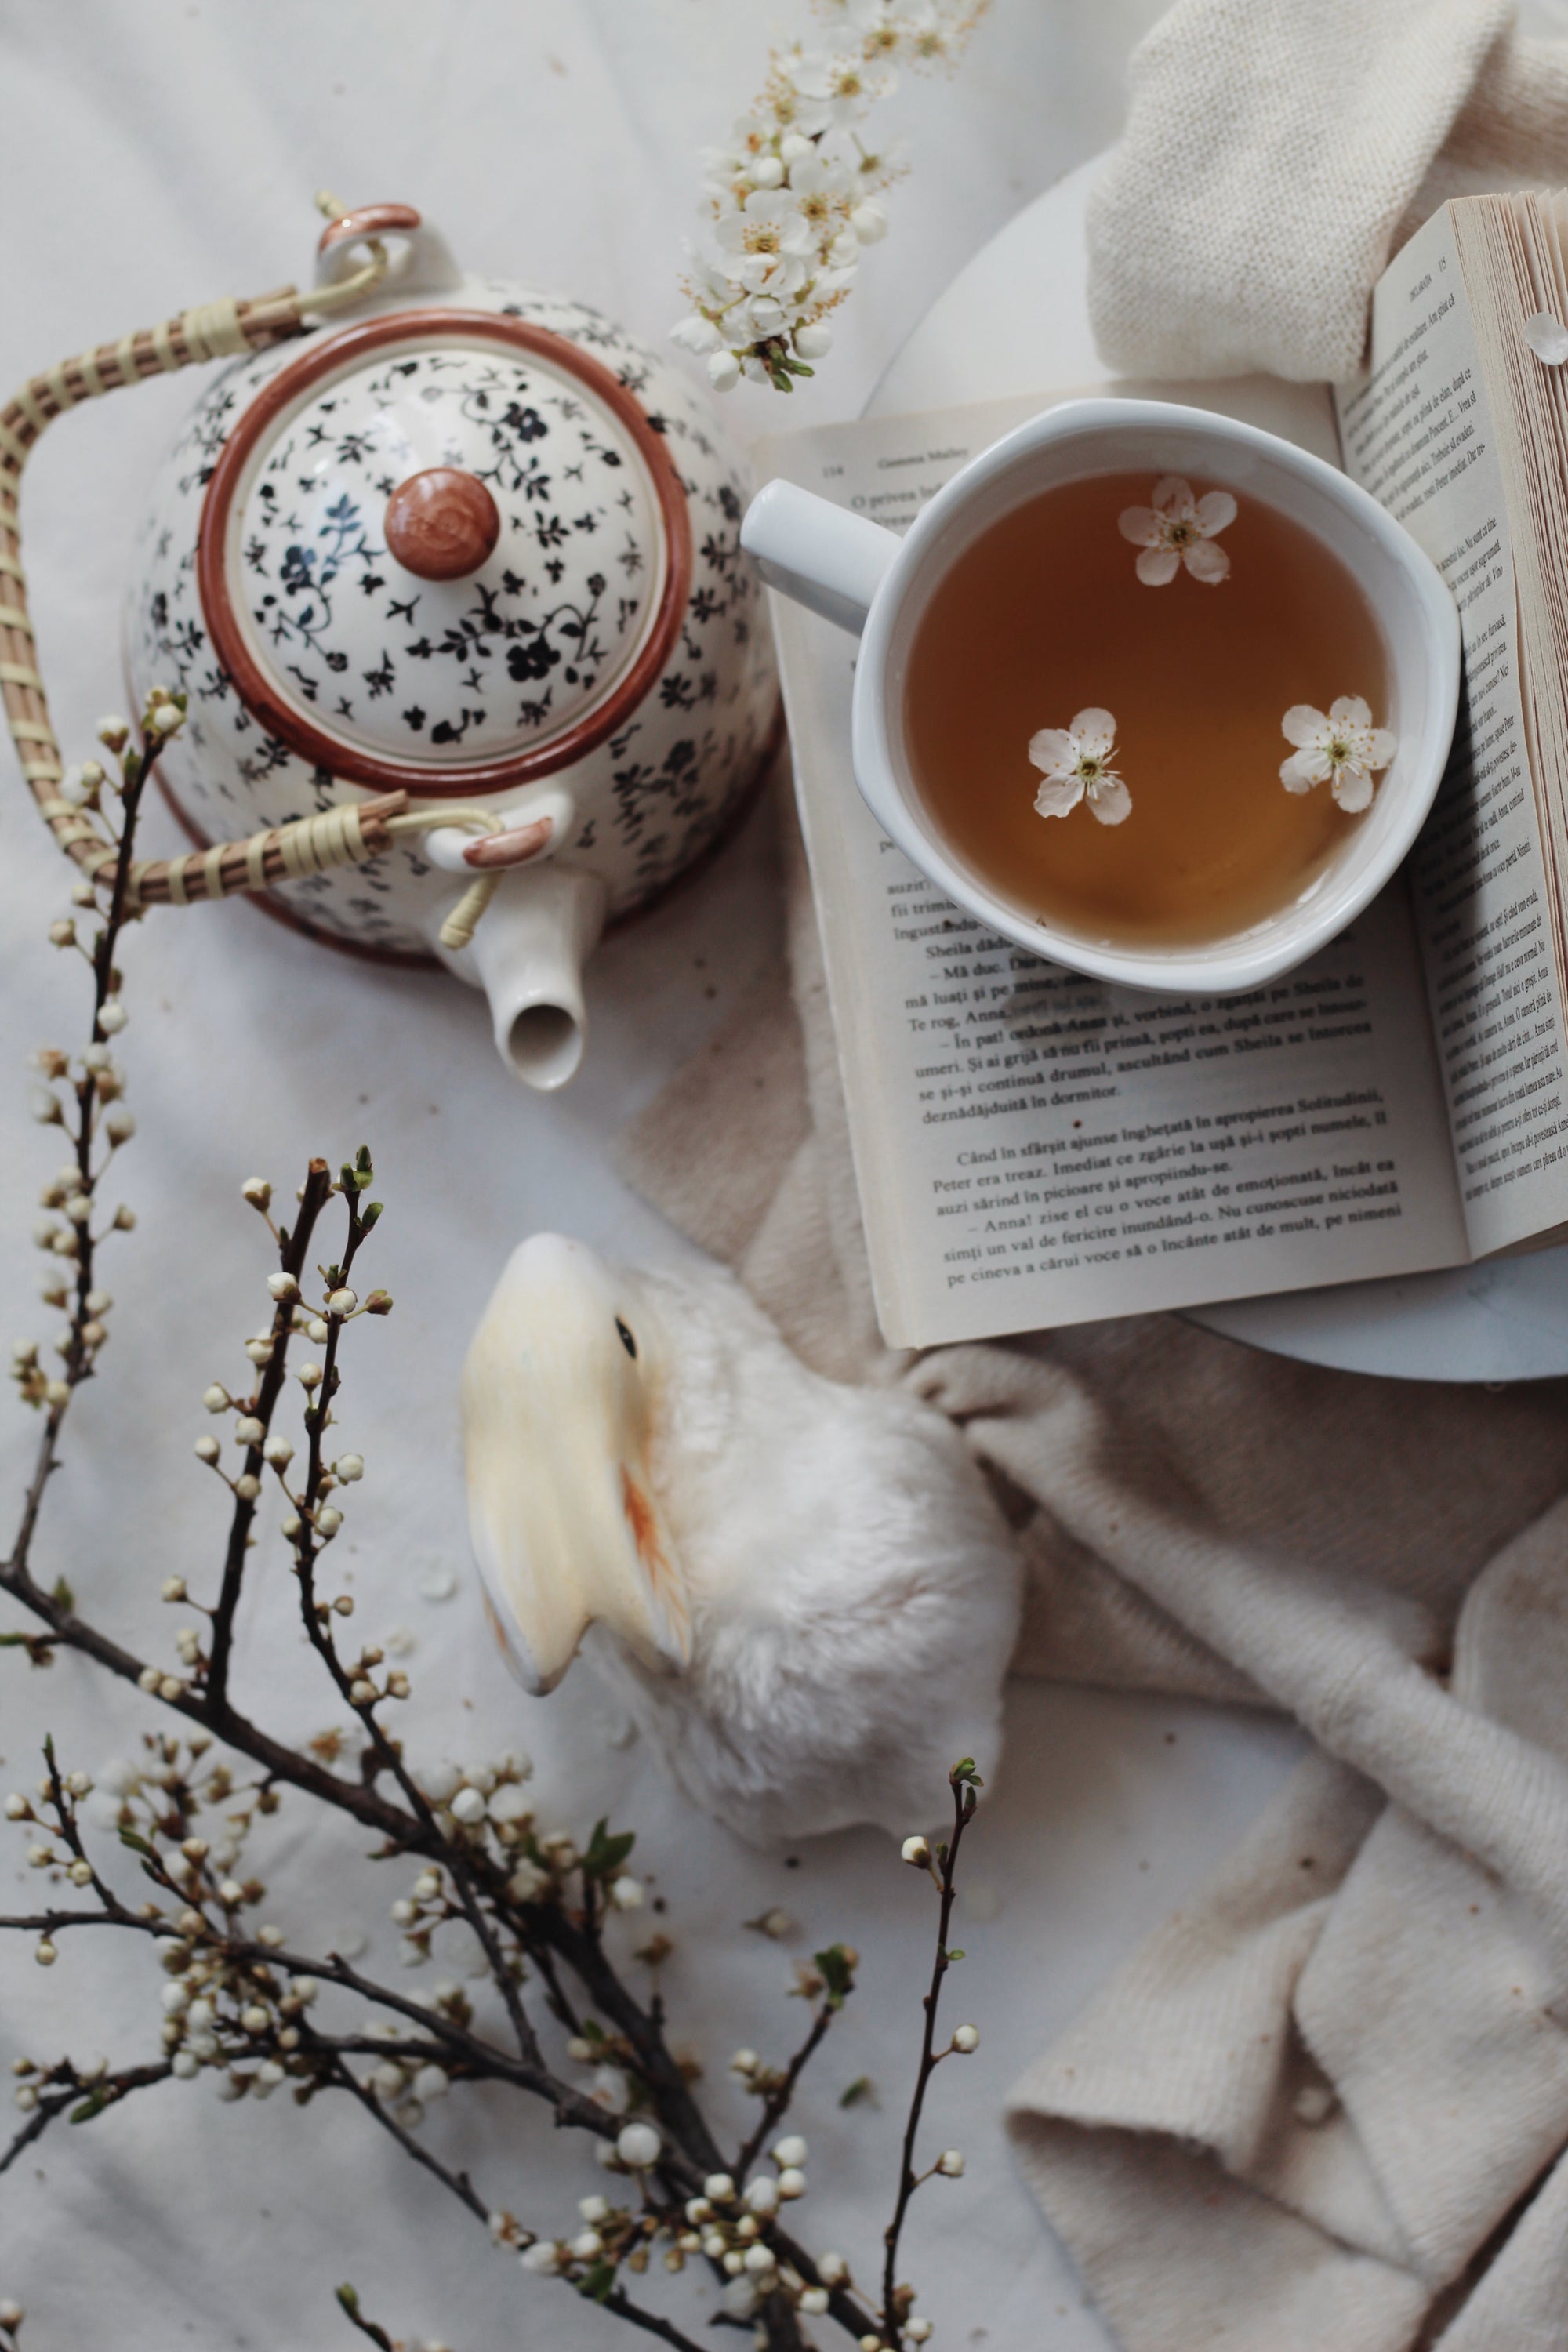 Spring Has Sprung! Here Are The Teas You Need For This Season Of New Growth